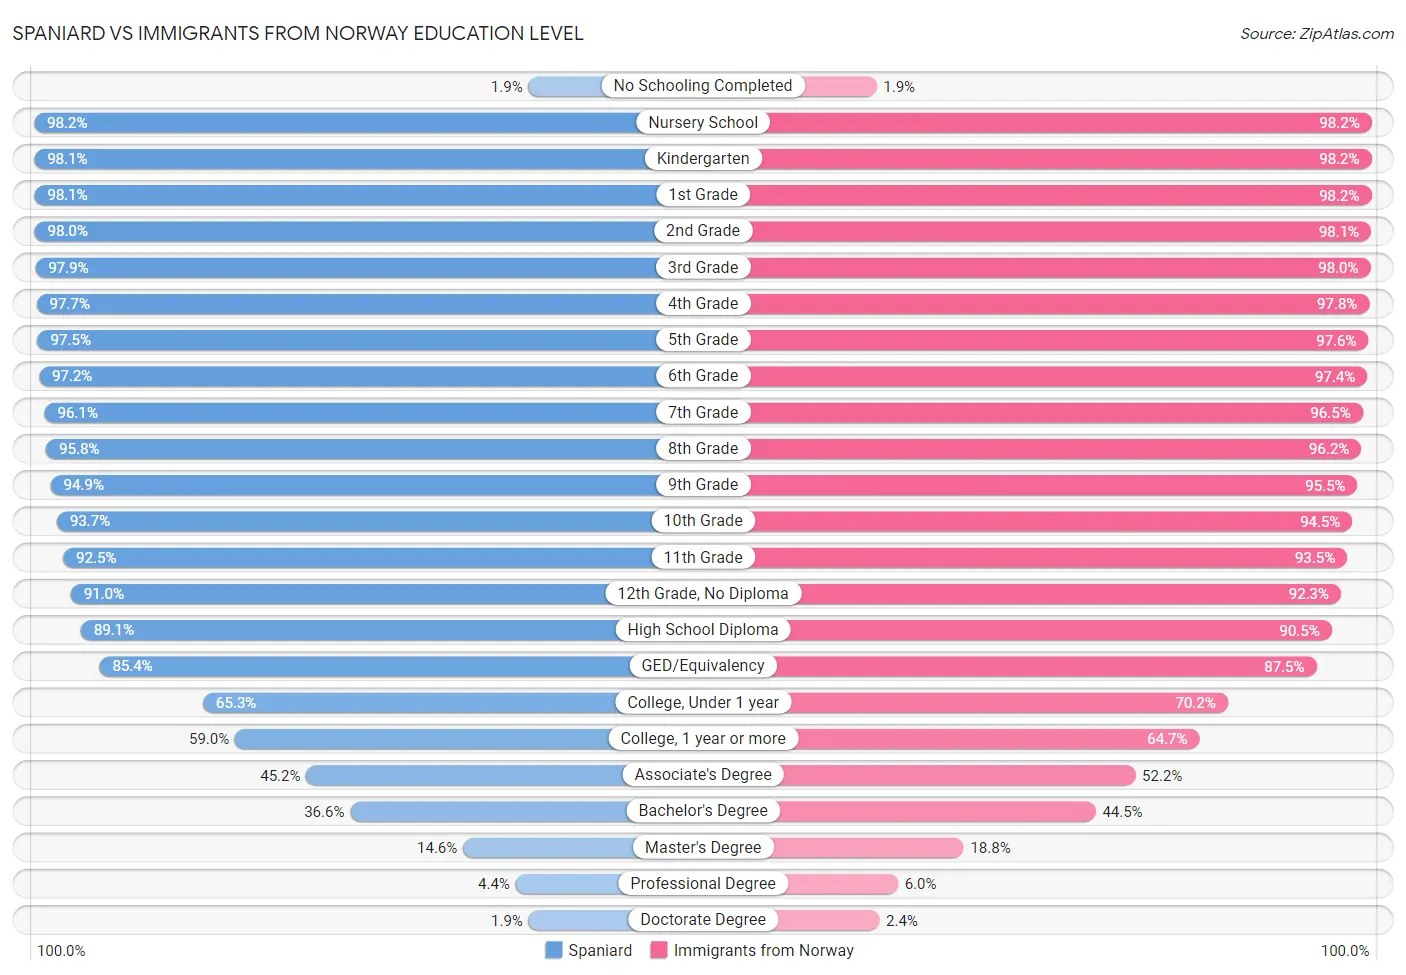 Spaniard vs Immigrants from Norway Education Level